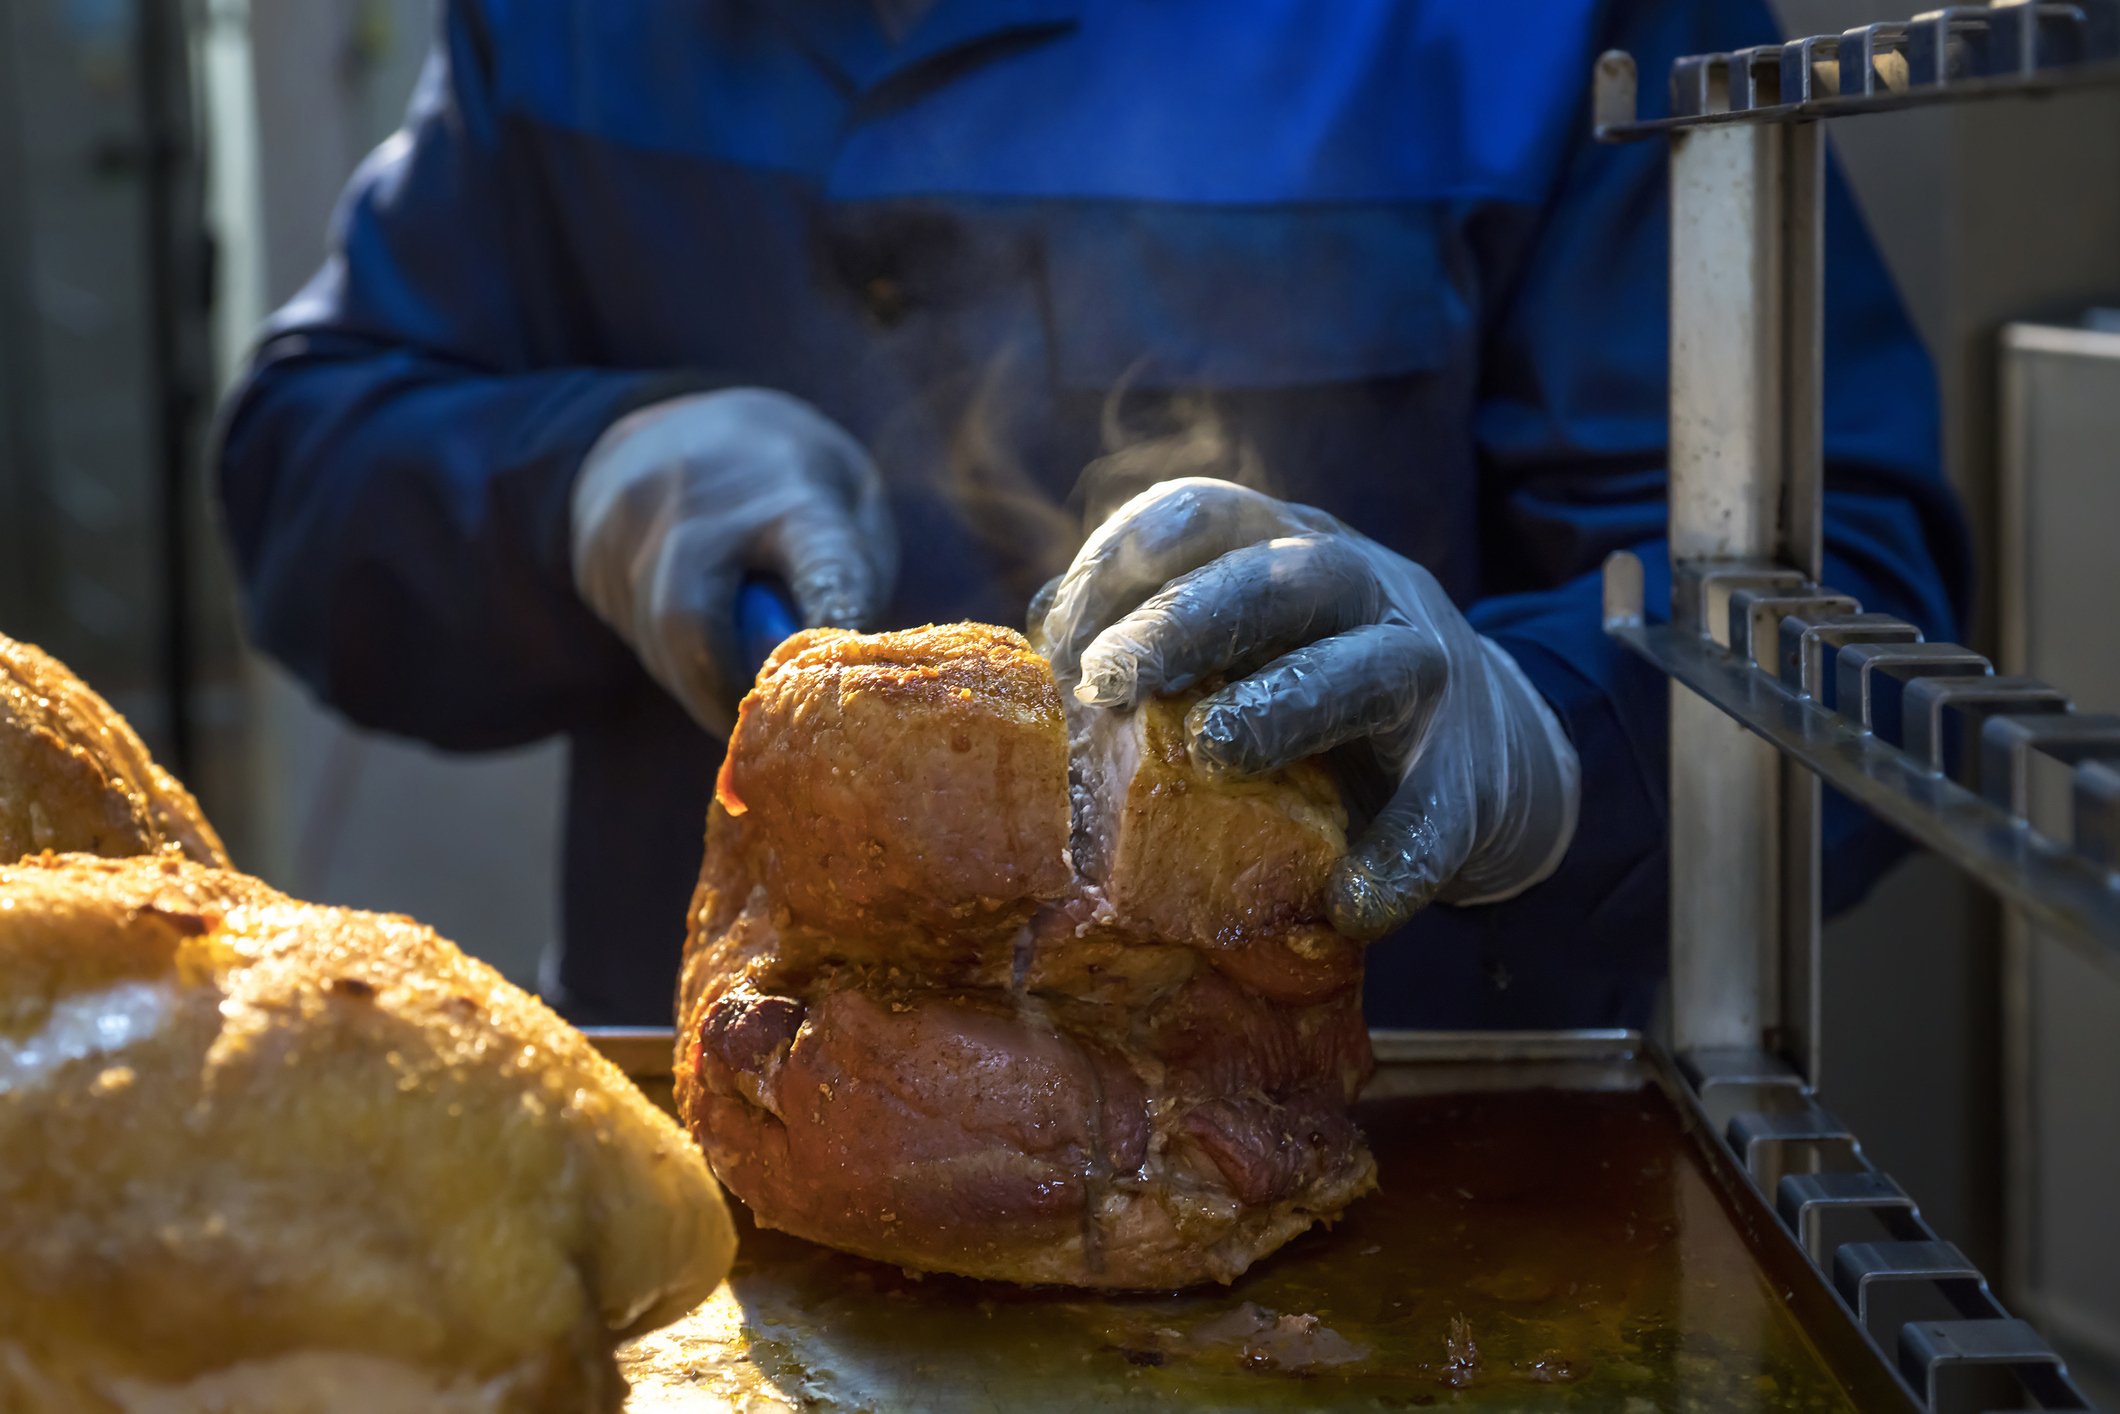 Worker at meat processing plant slices into a cut of cooked meat. Image courtesy of Getty Images.